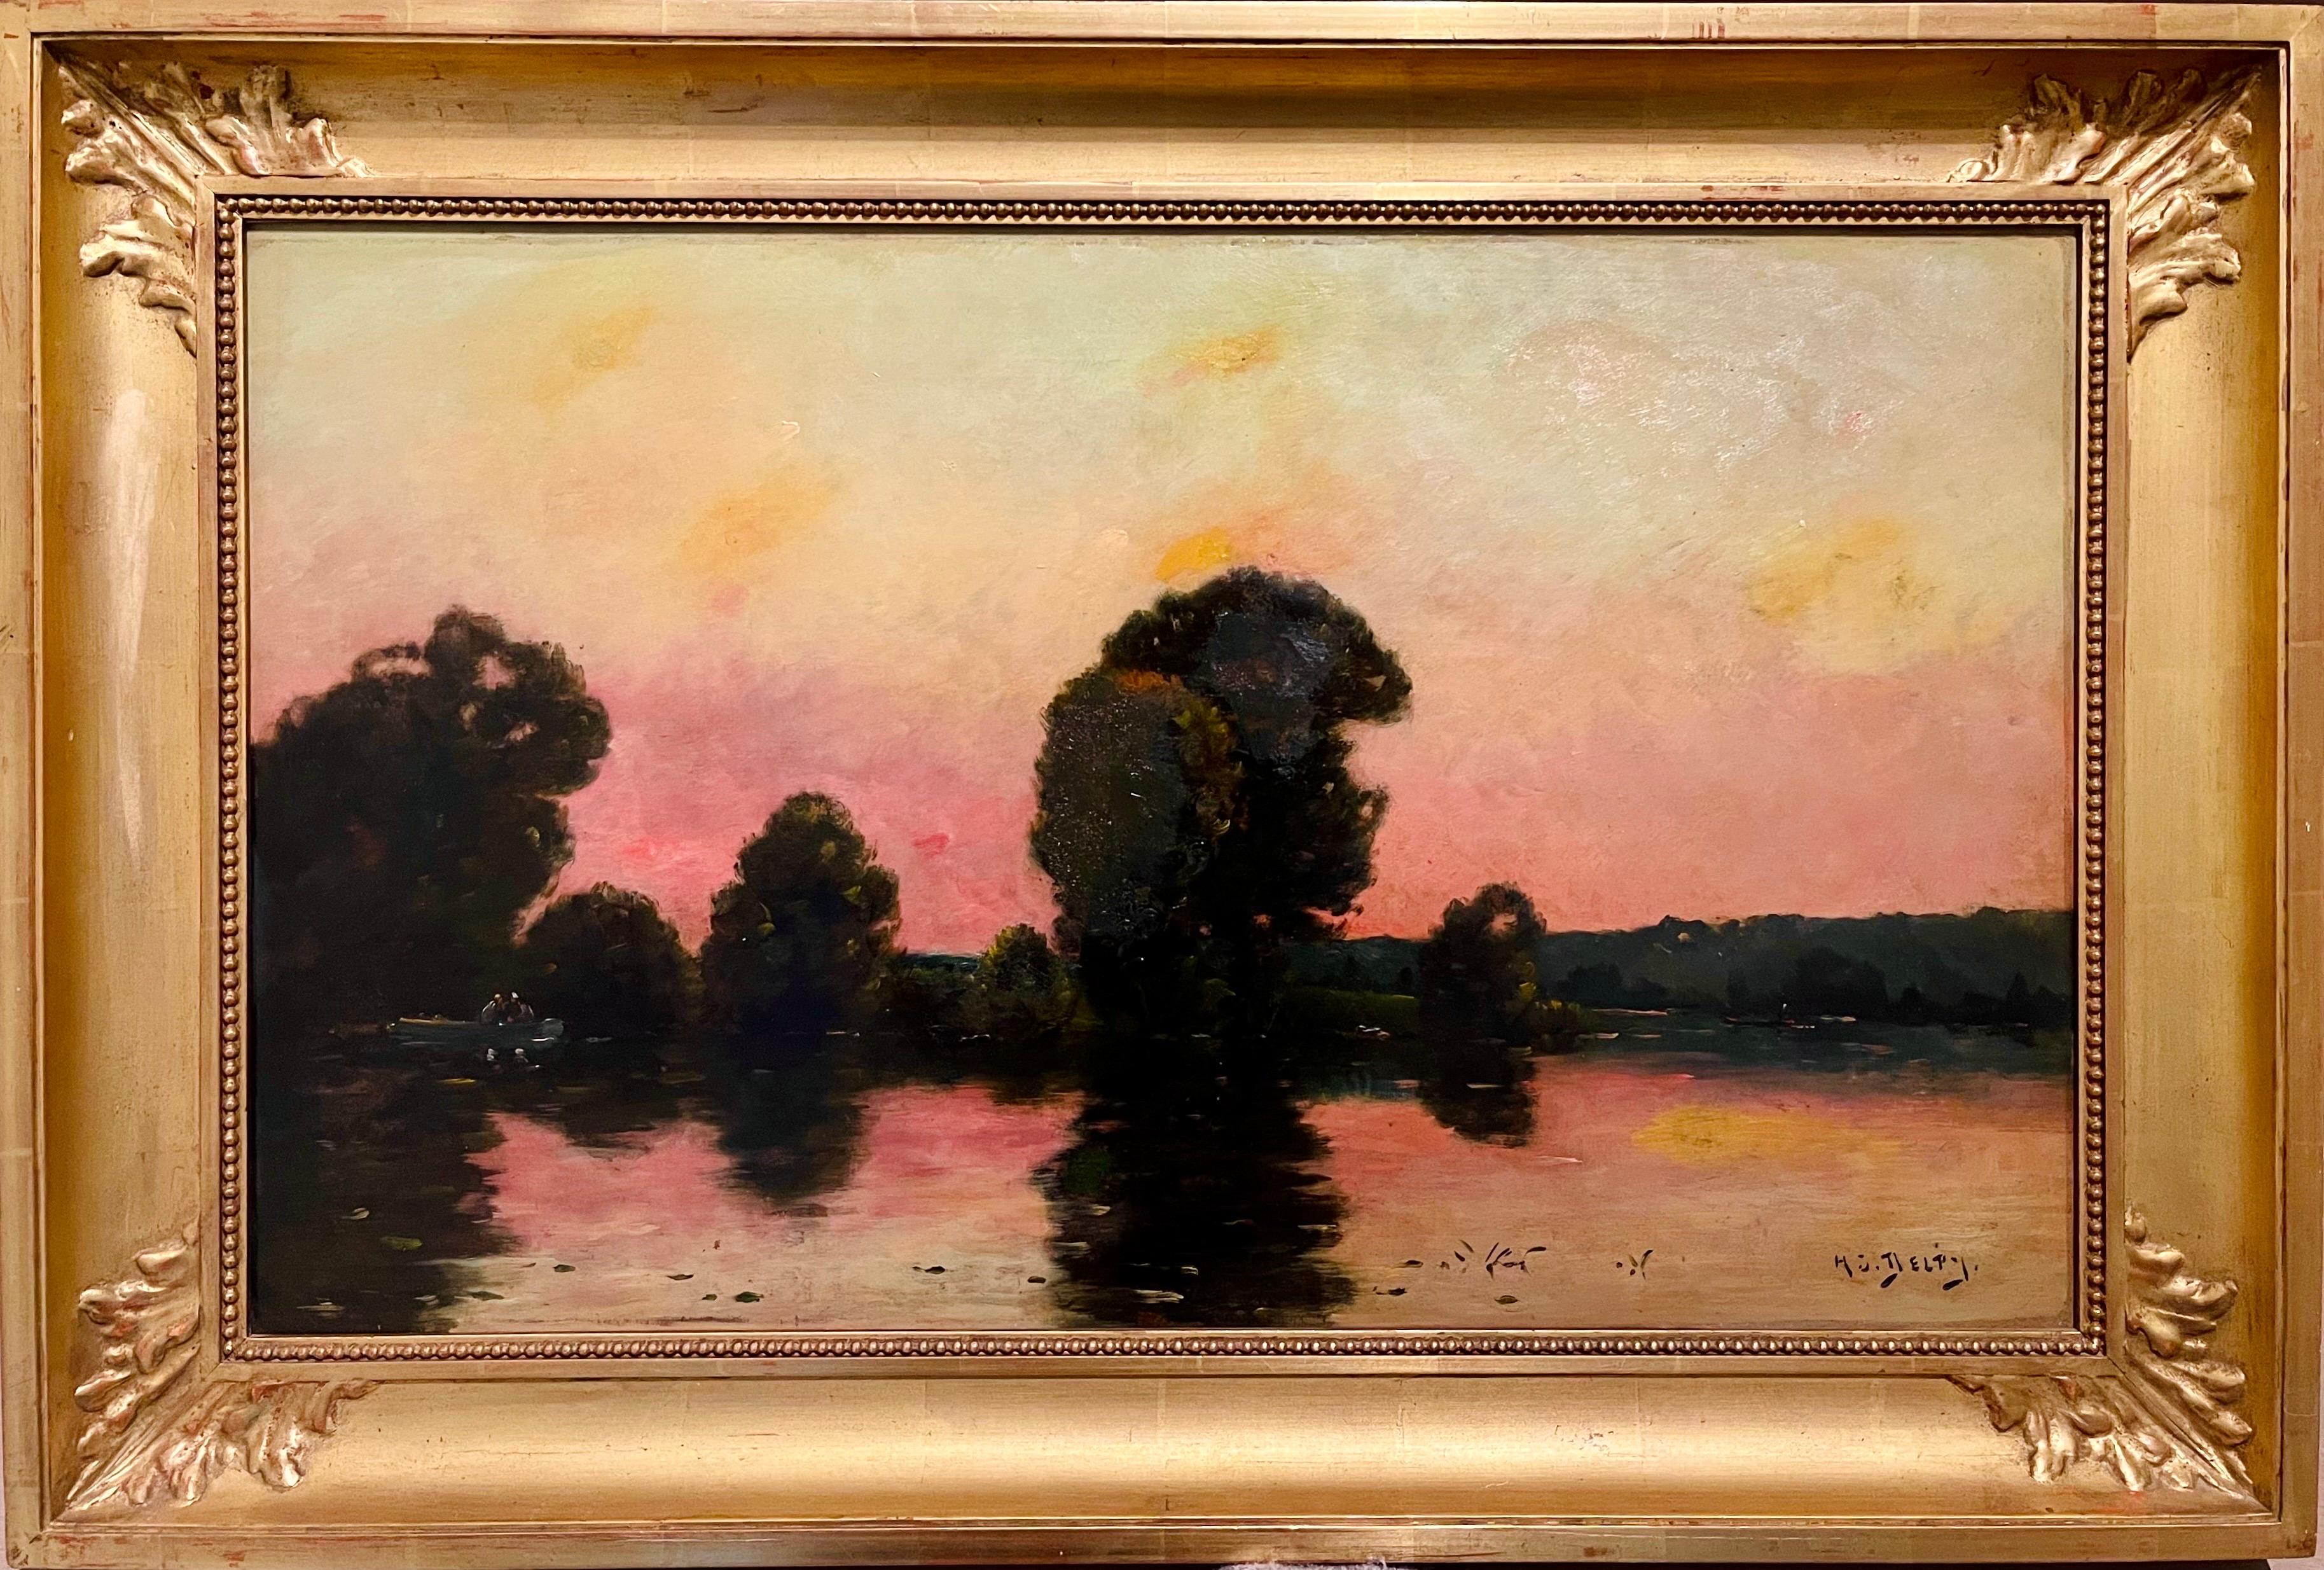 Henry Jacques Delpy Figurative Painting - French Barbizon School oil painting River landscape by sunset impressionist 1910